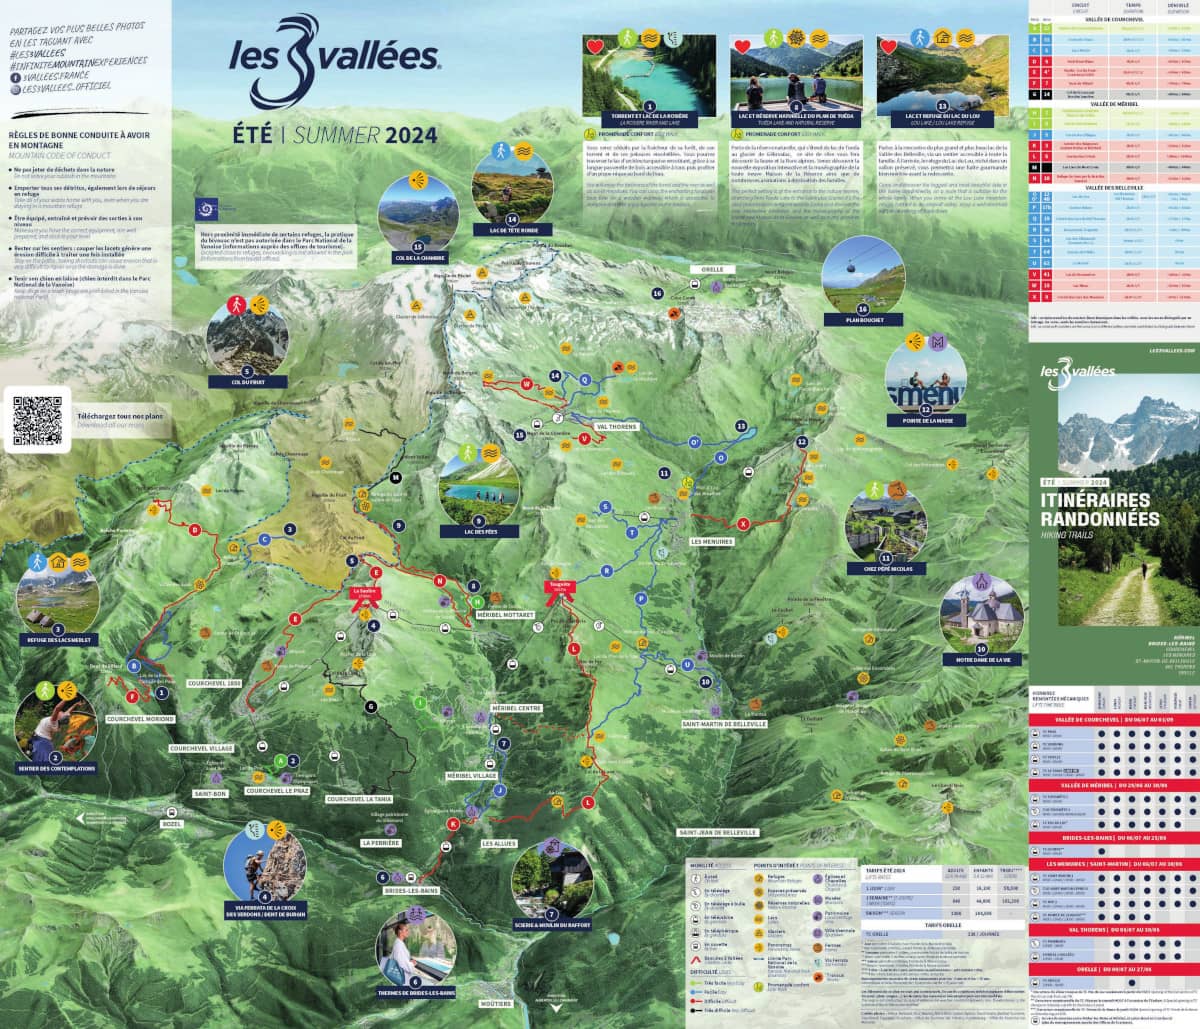 Map of all pedestrian itineraries in the 3 Valleys